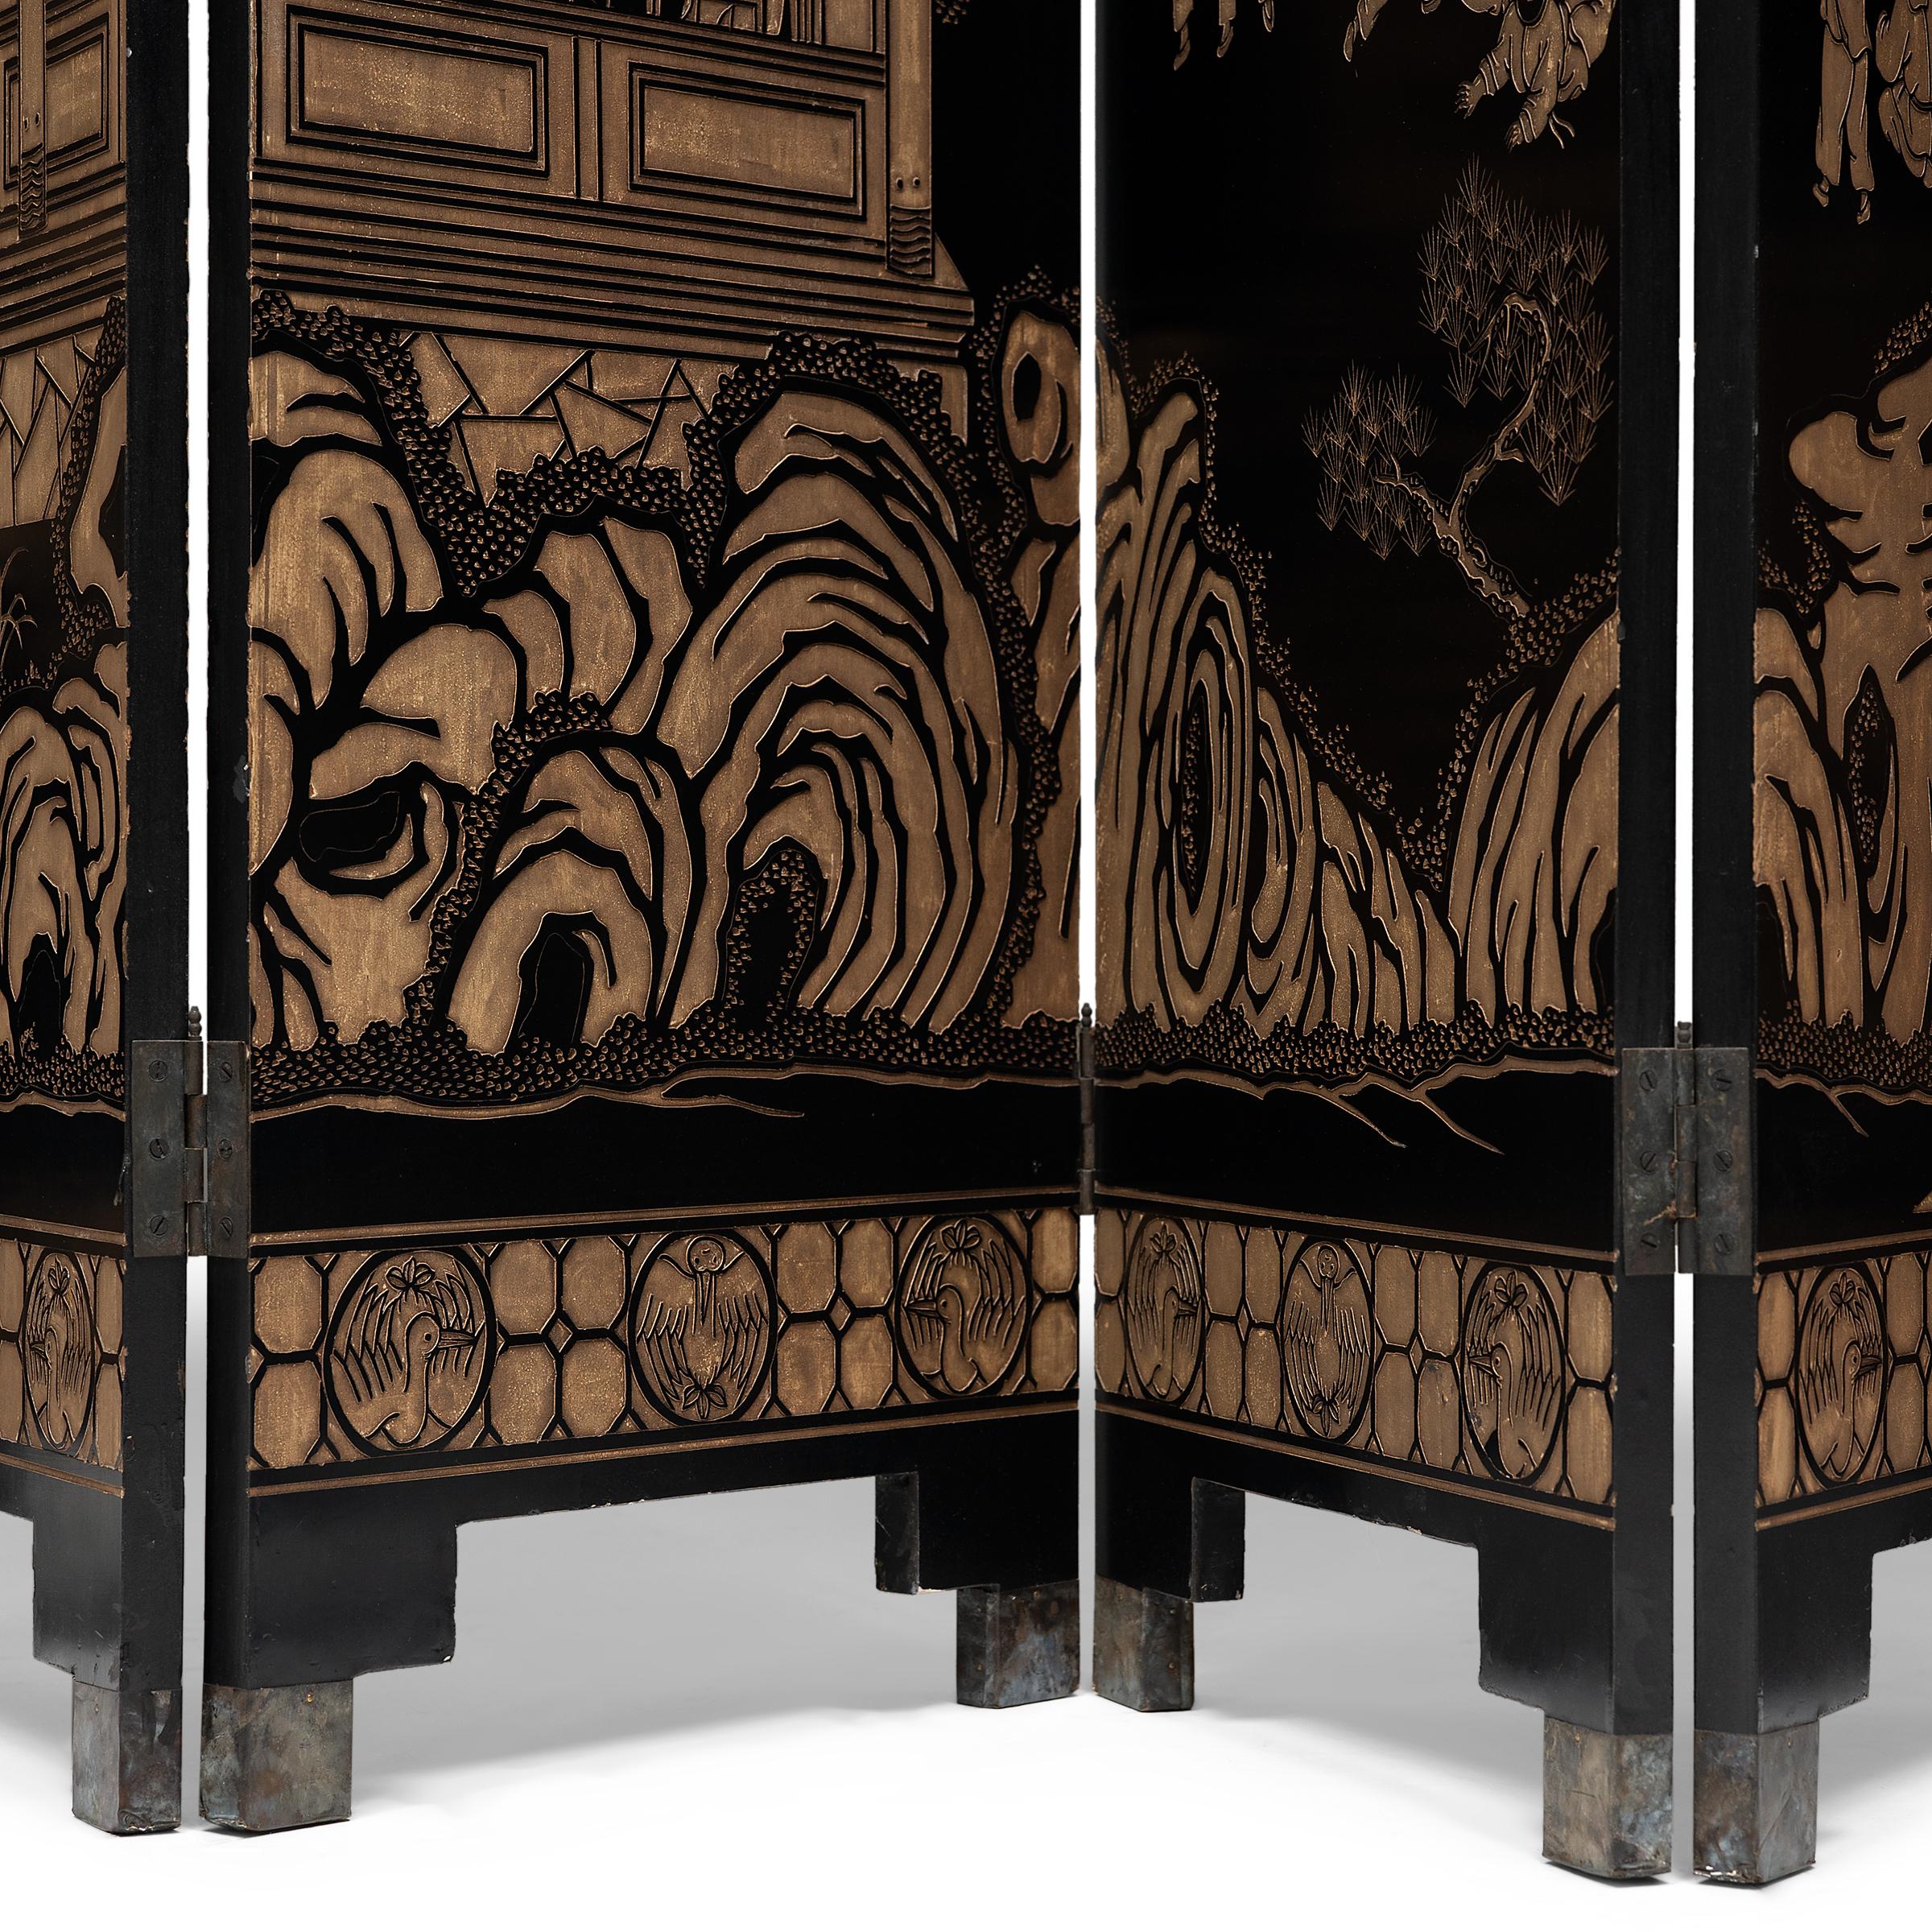 This showstopping eight panel folding screen is expertly crafted in the Chinoiserie style of the 20th century with a gold & black finish known as coromandel lacquer. Named after European trade routes that ran along the Coromandel coast, coromandel